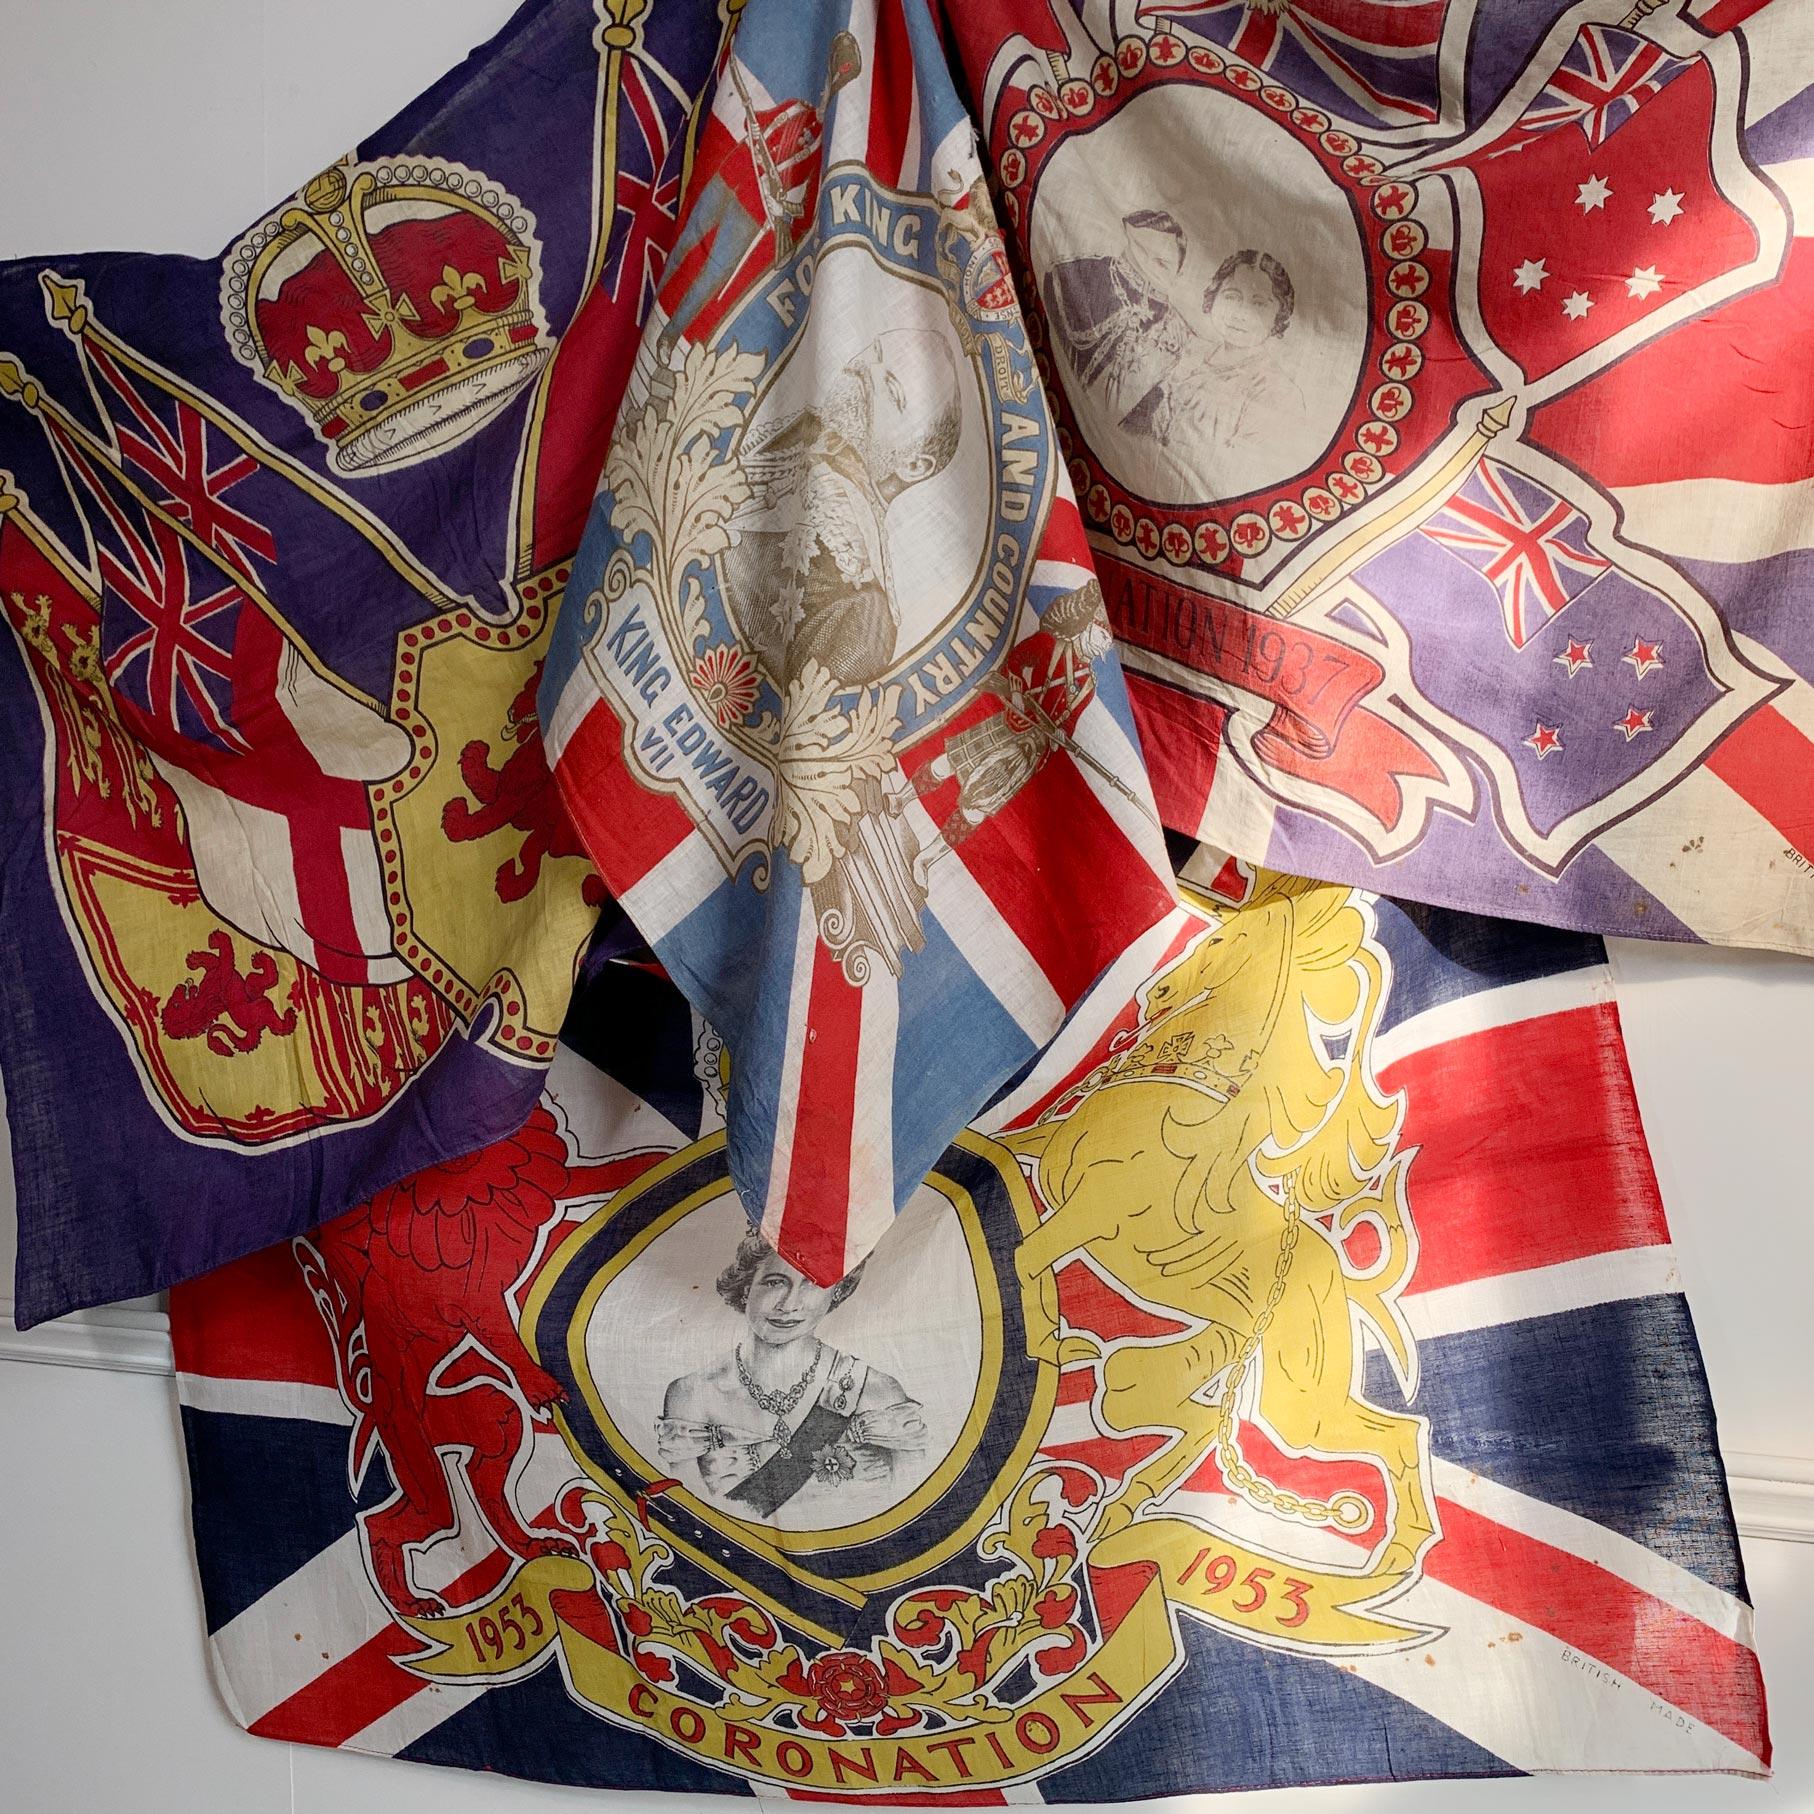 King George VI and Queen Elizabeth the Queen Mother Coronation Flag, 1937 For Sale 5